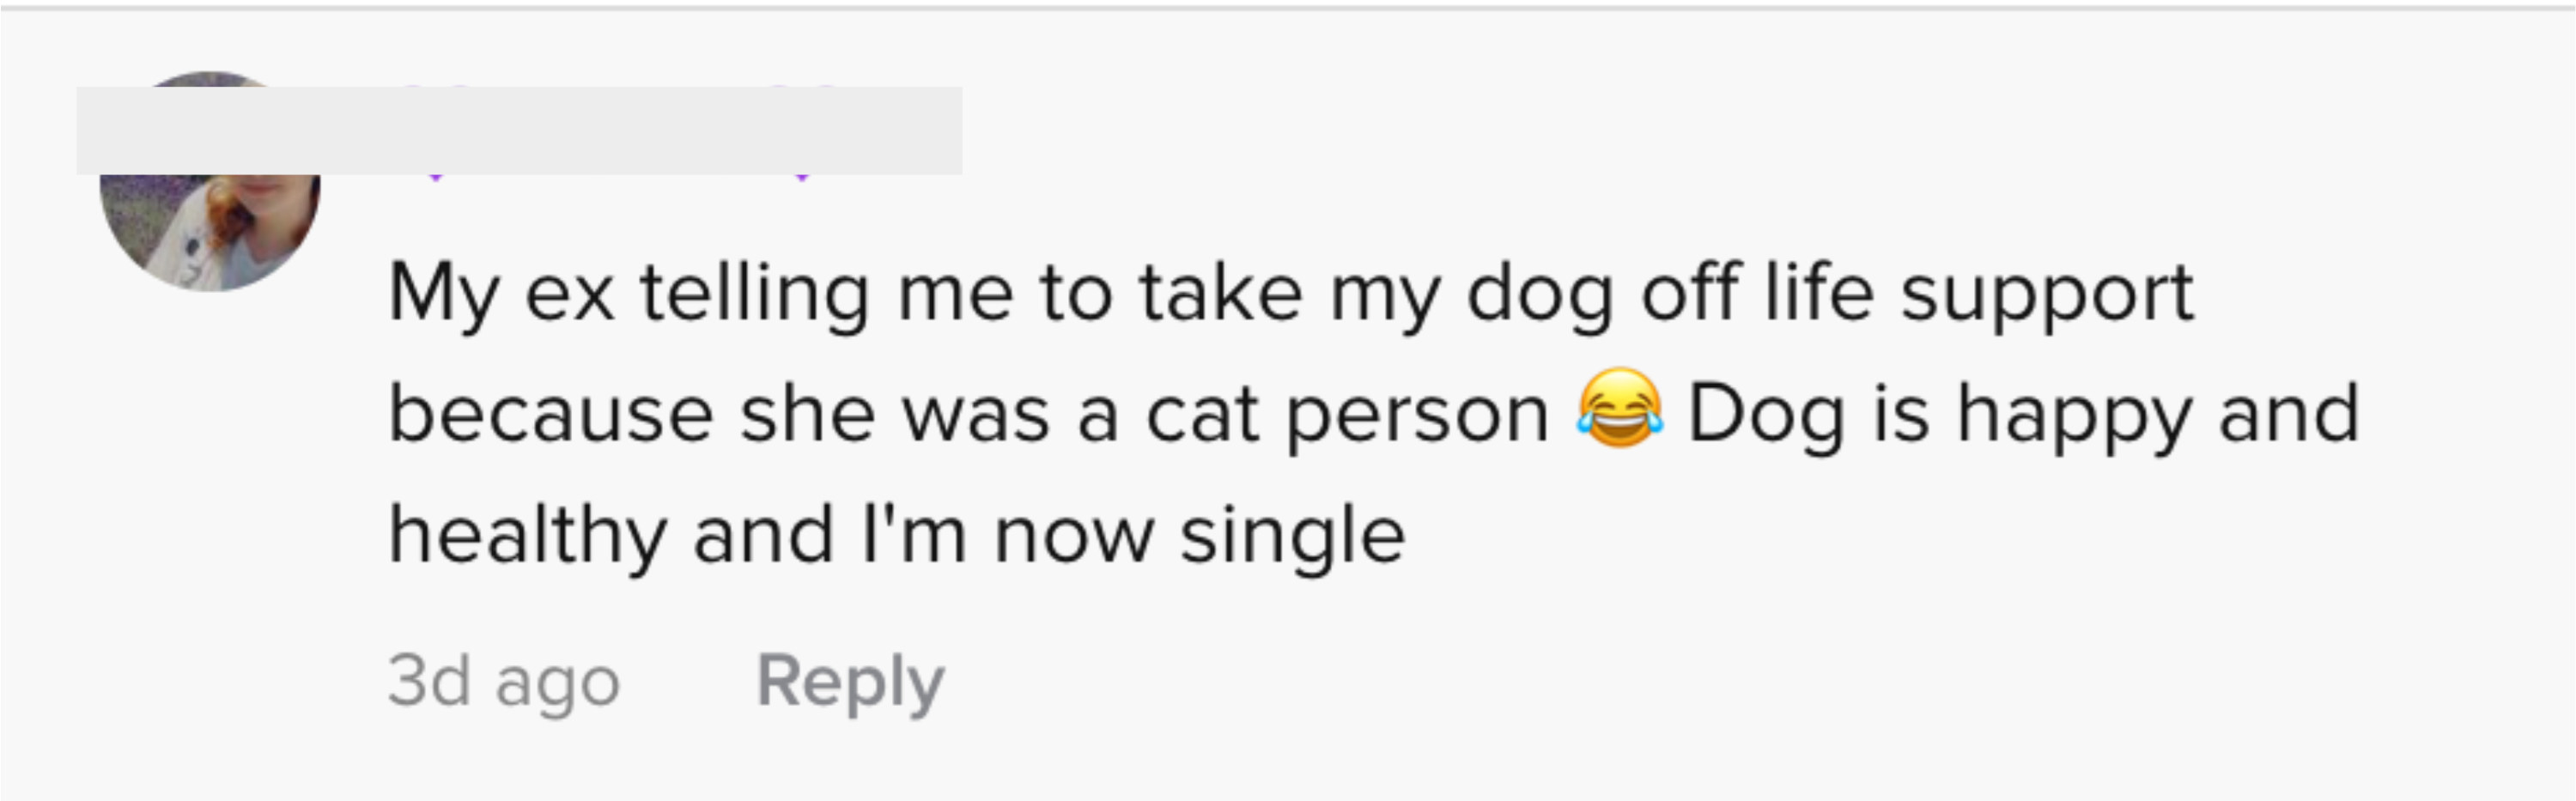 My ex telling me to take my dog off life support because she was a cat person. Dog is happy and healthy and I&#x27;m now single.